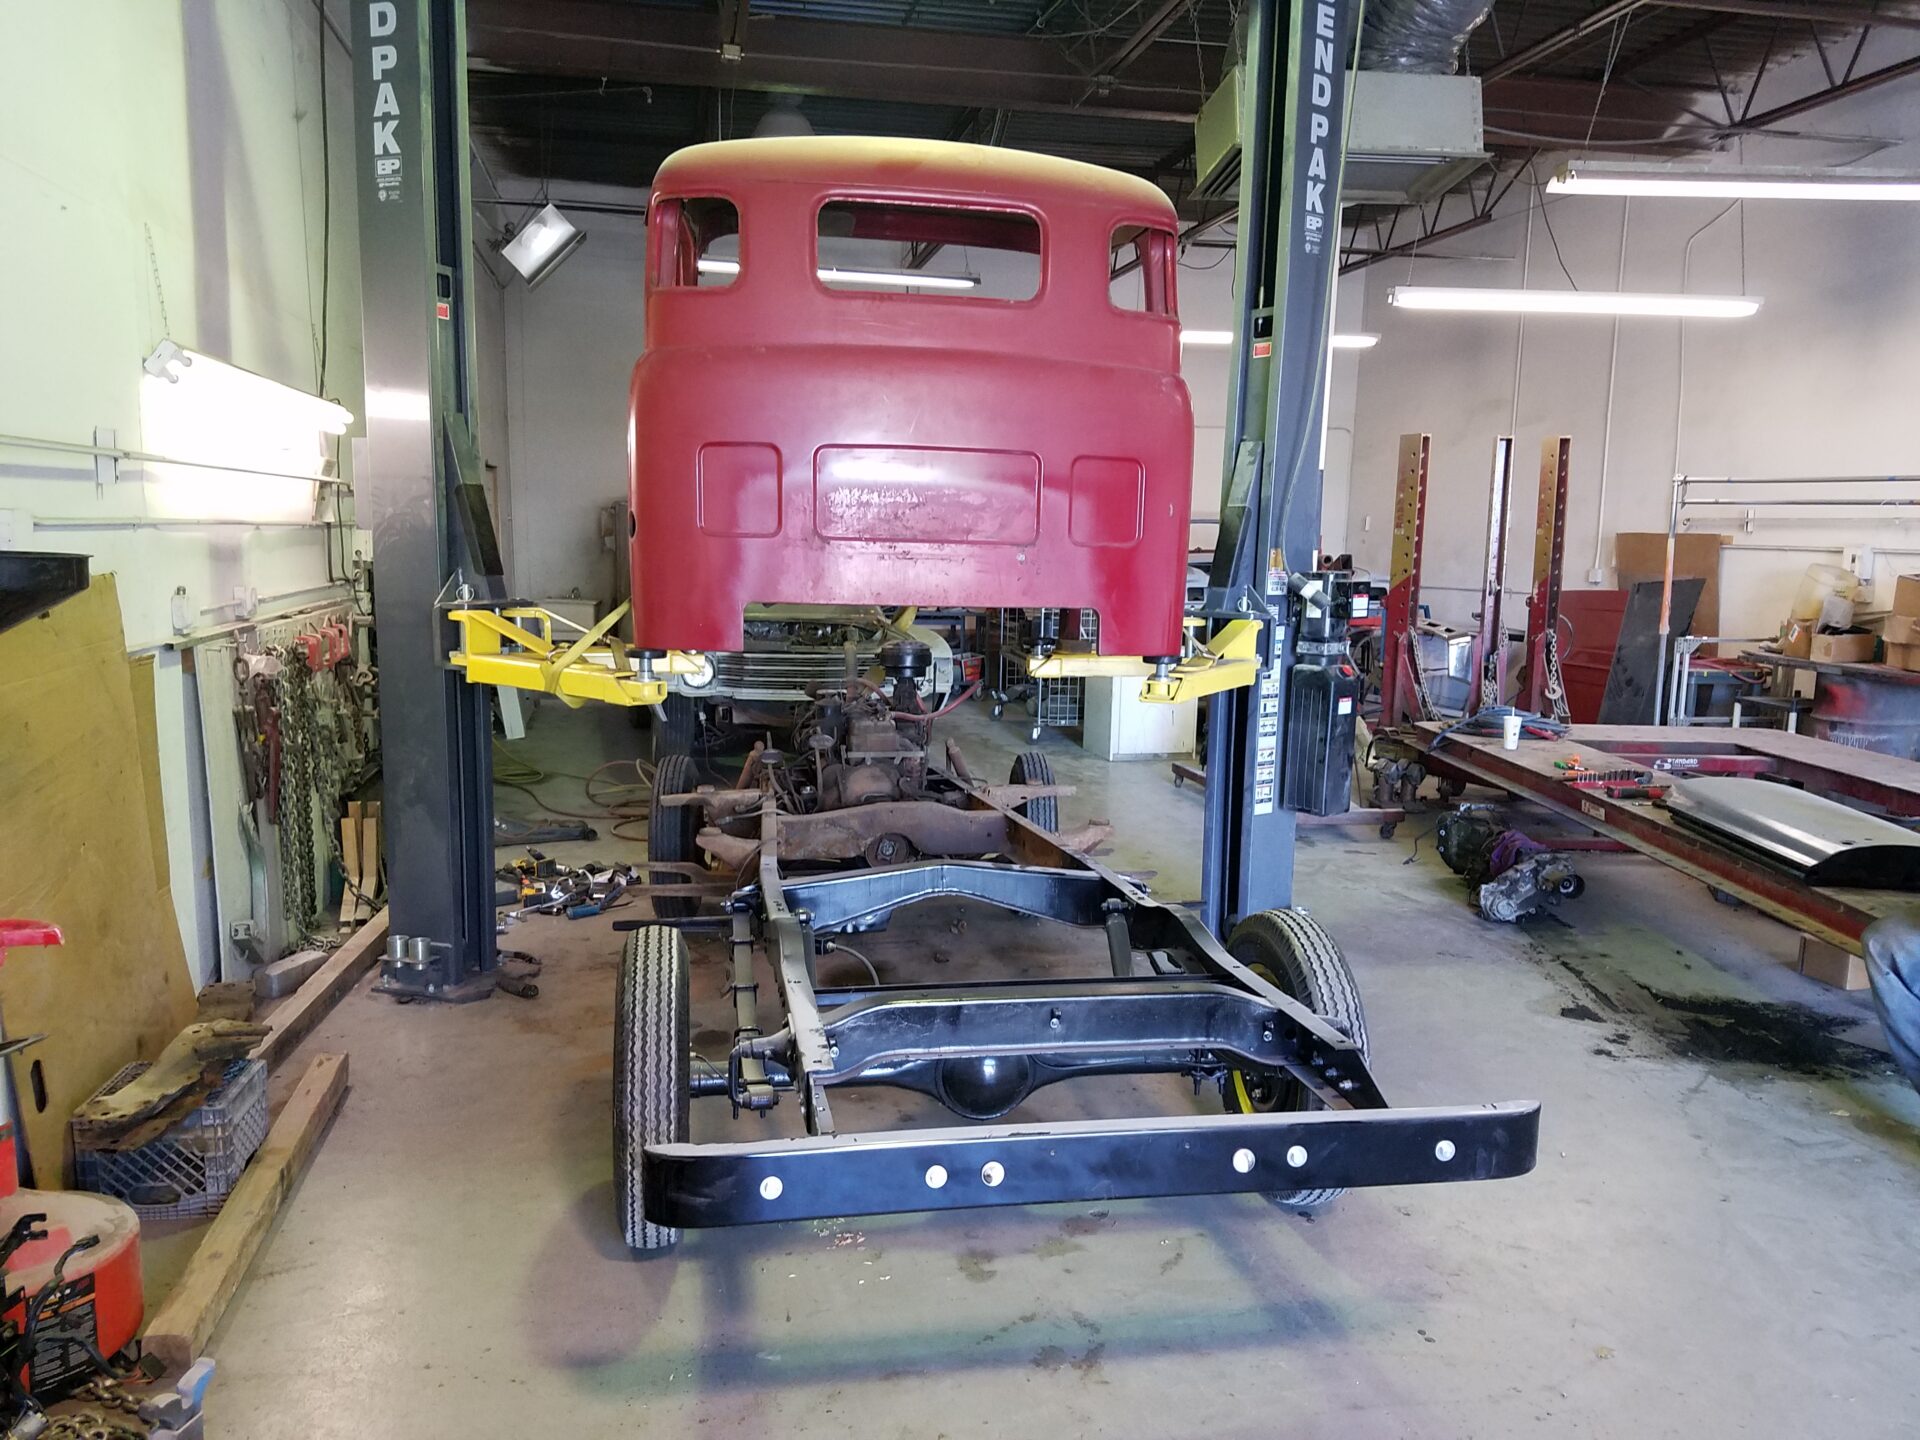 The car frame lifted up